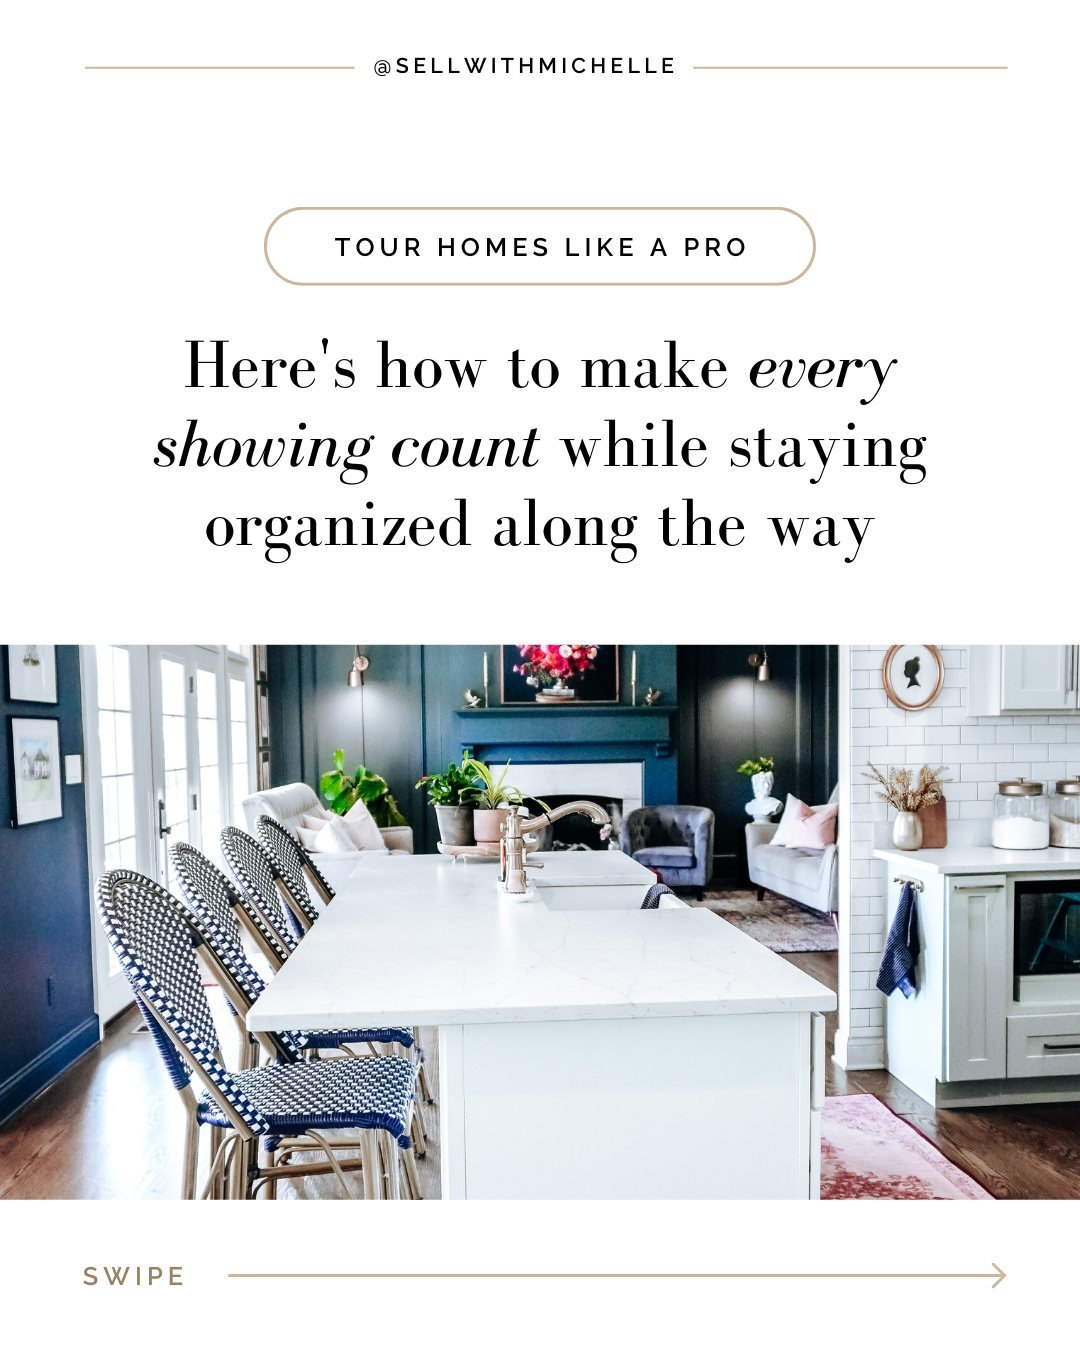 🤩You: excited future homeowner who&rsquo;s ready to look at homes

🤓Me: experienced real estate agent with the tips to make your home tours a success! 

So, be sure to swipe through this carousel to learn how to prepare for home tours, what to do d